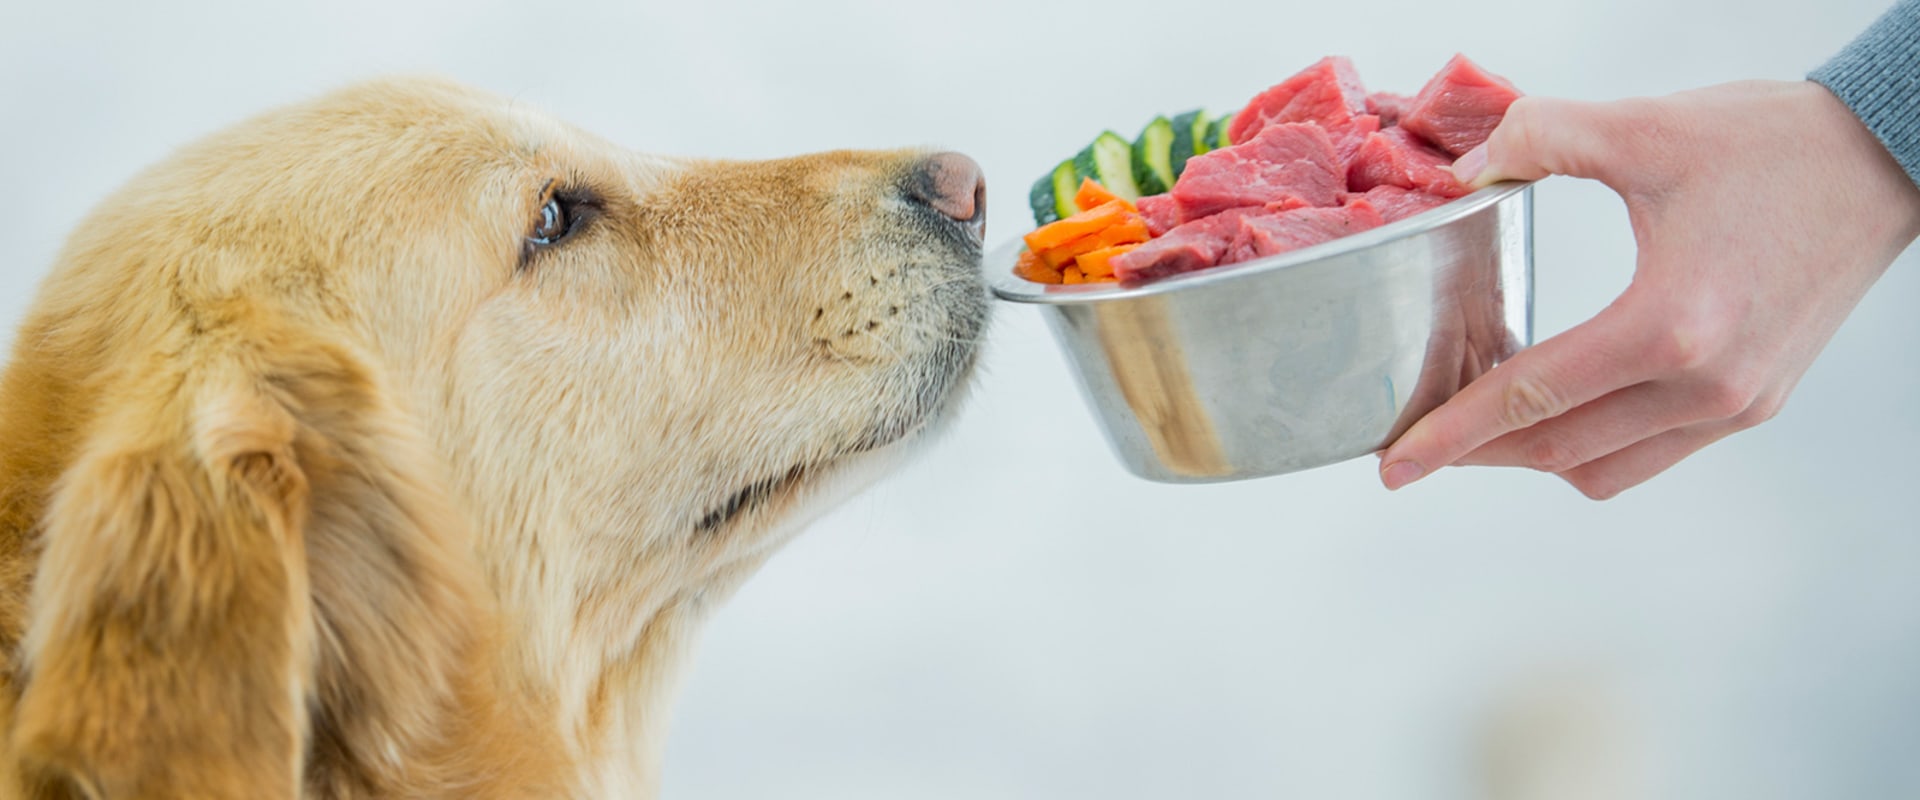 What is the healthiest dog food in stores?